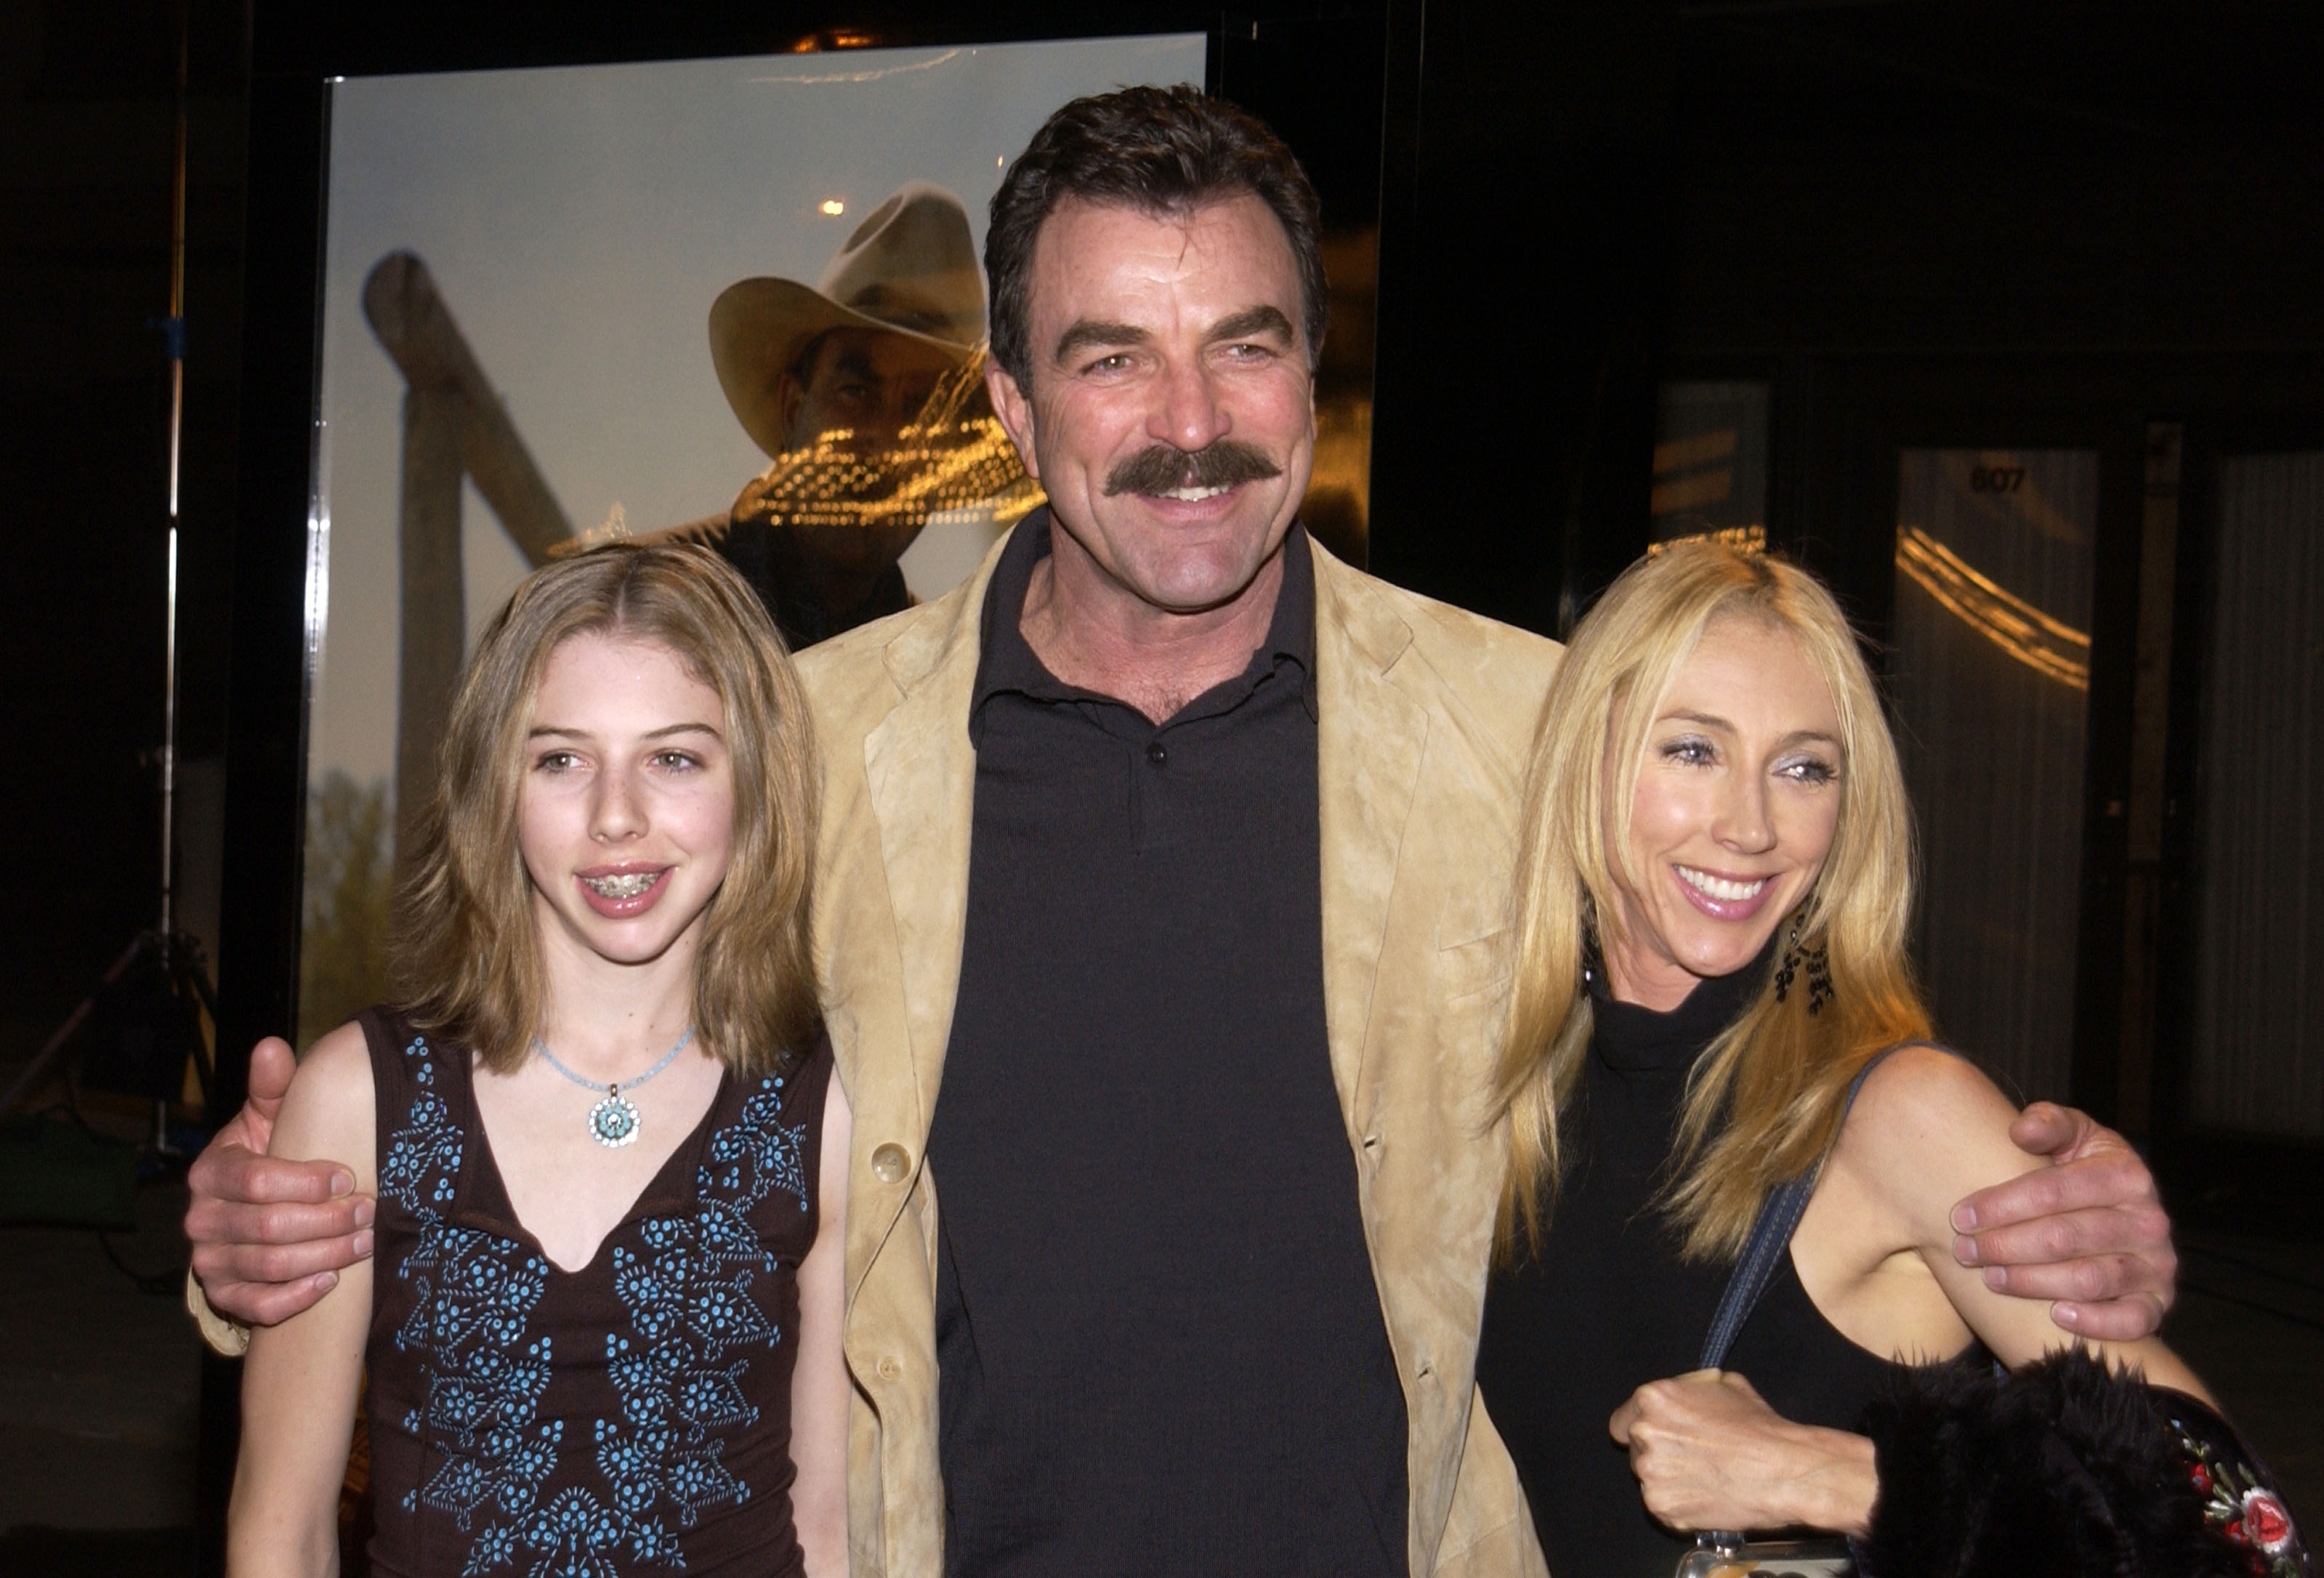 Actor Tom Selleck, wife Jillie Mack, and daughter Hannah Selleck in Los Angeles, 2003 | Source: Getty Images